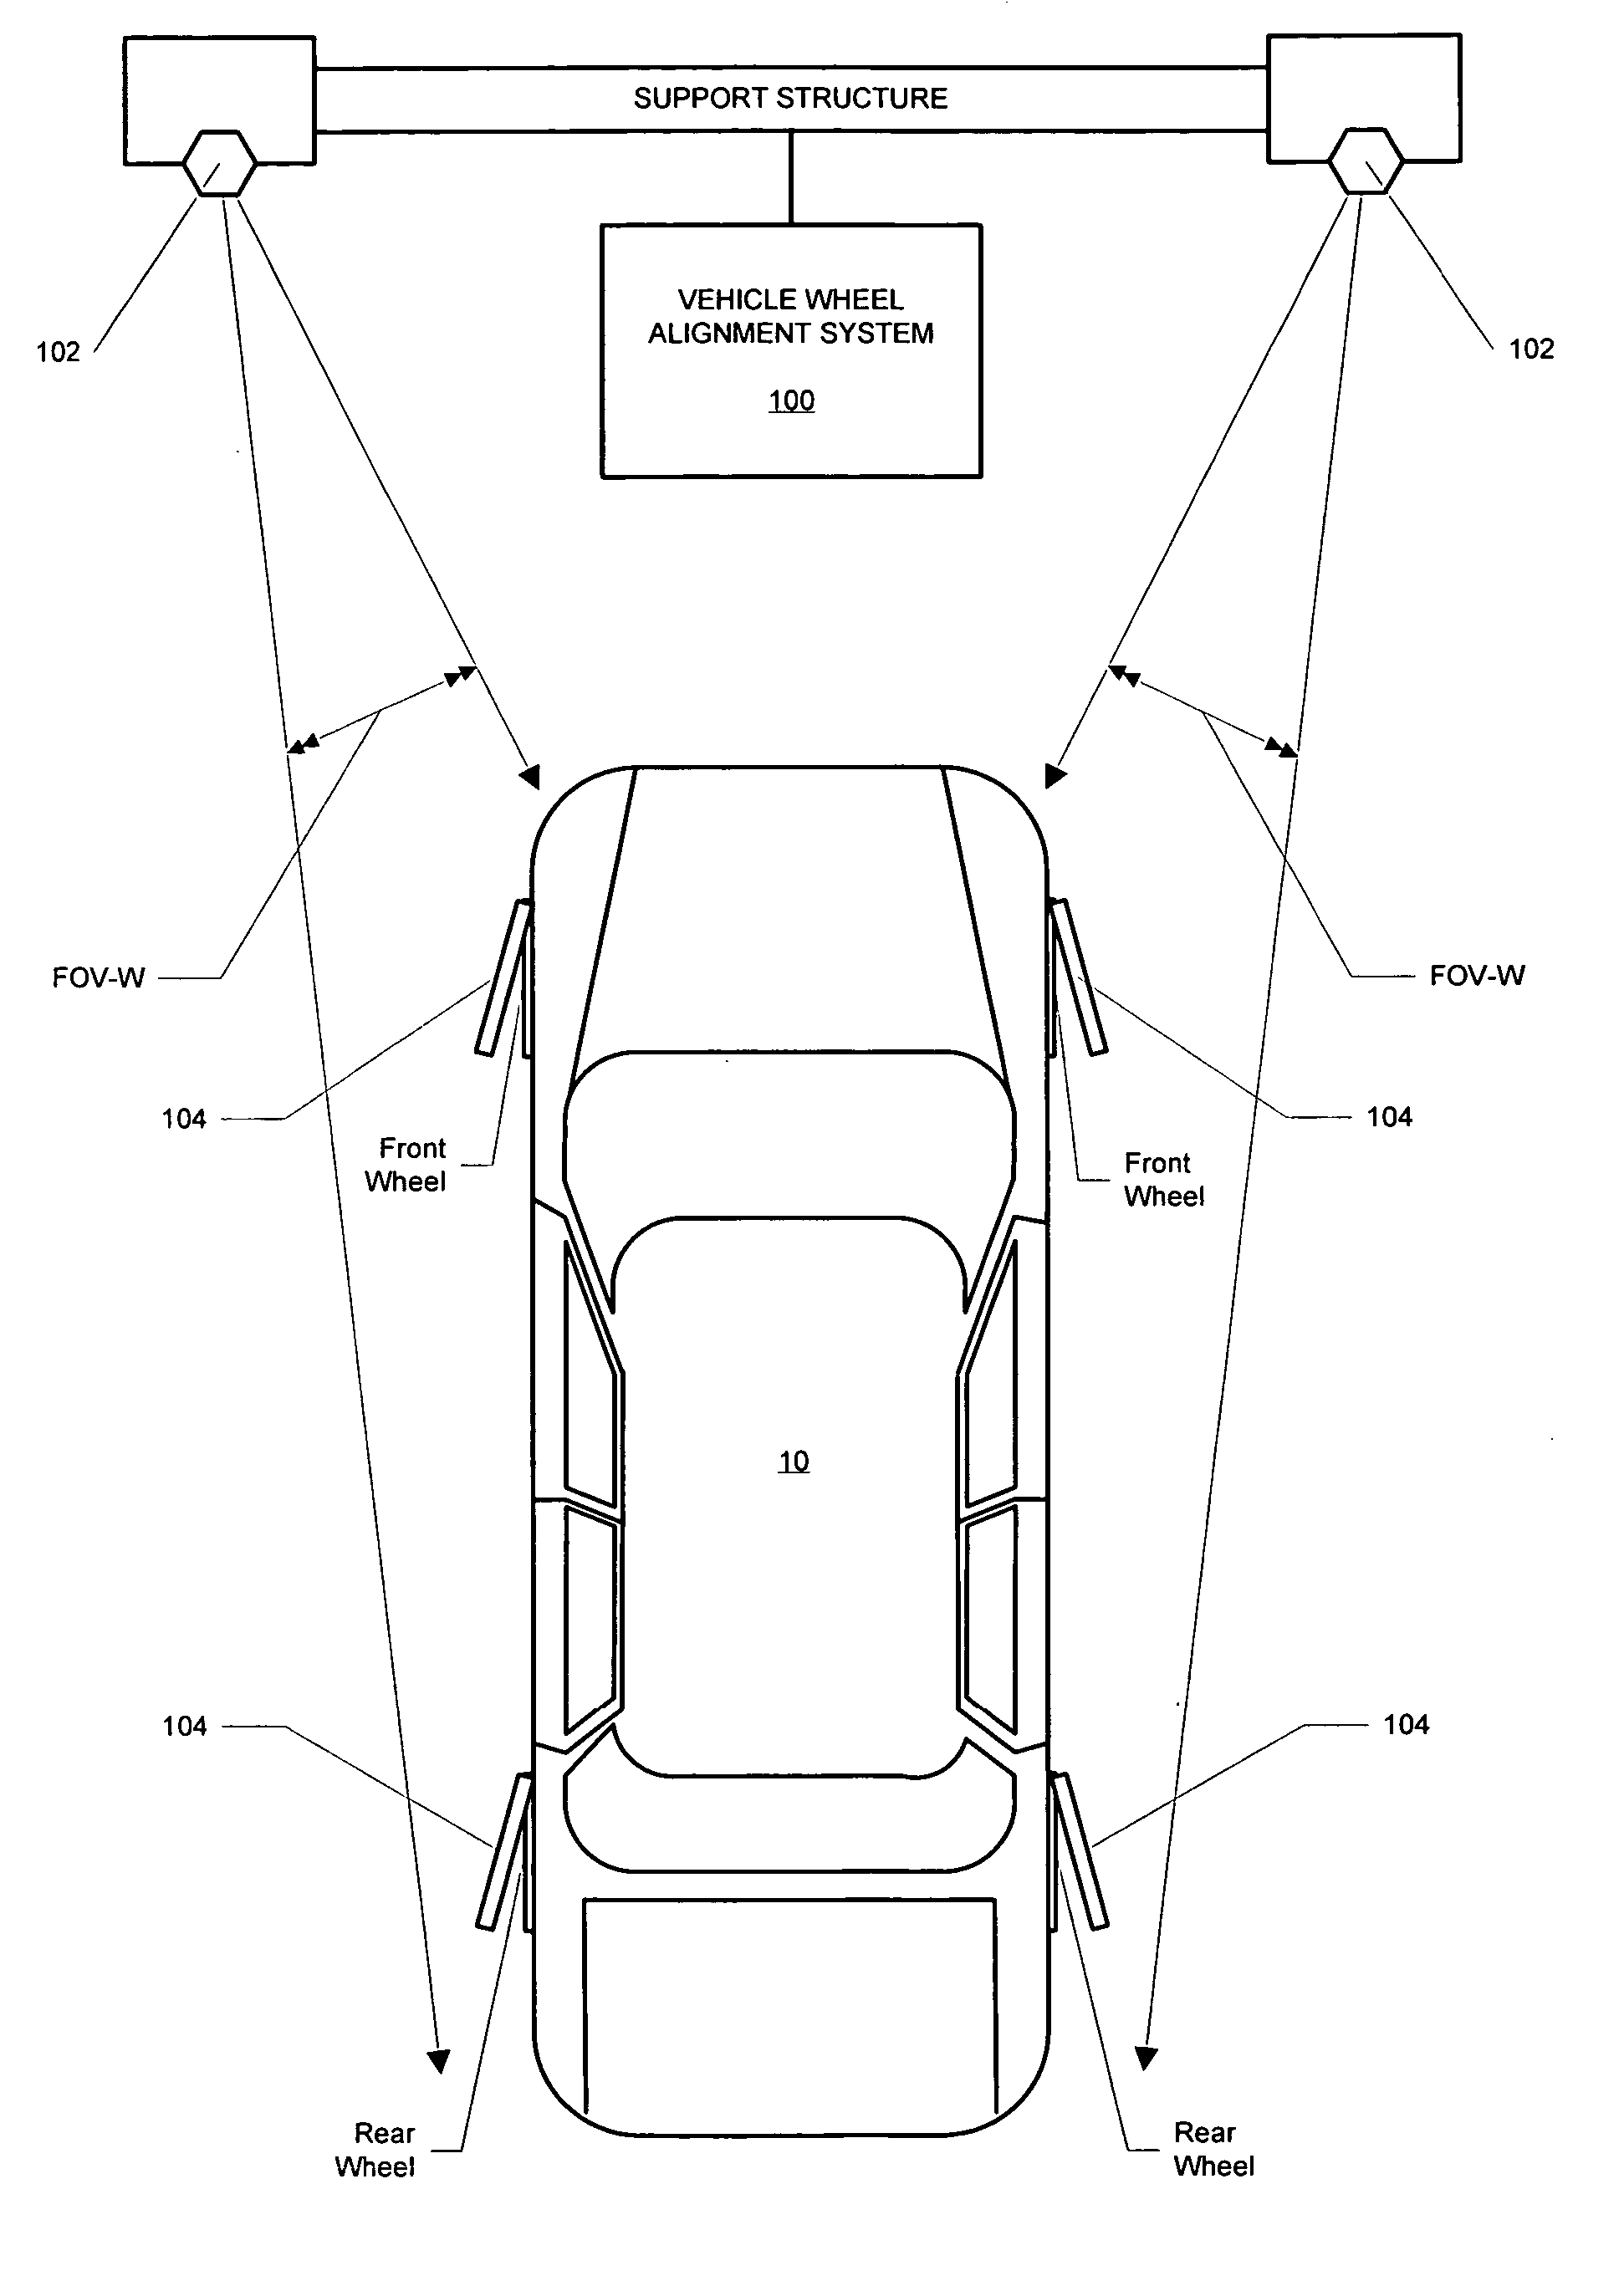 Vehicle service system with variable-lens imaging sensors